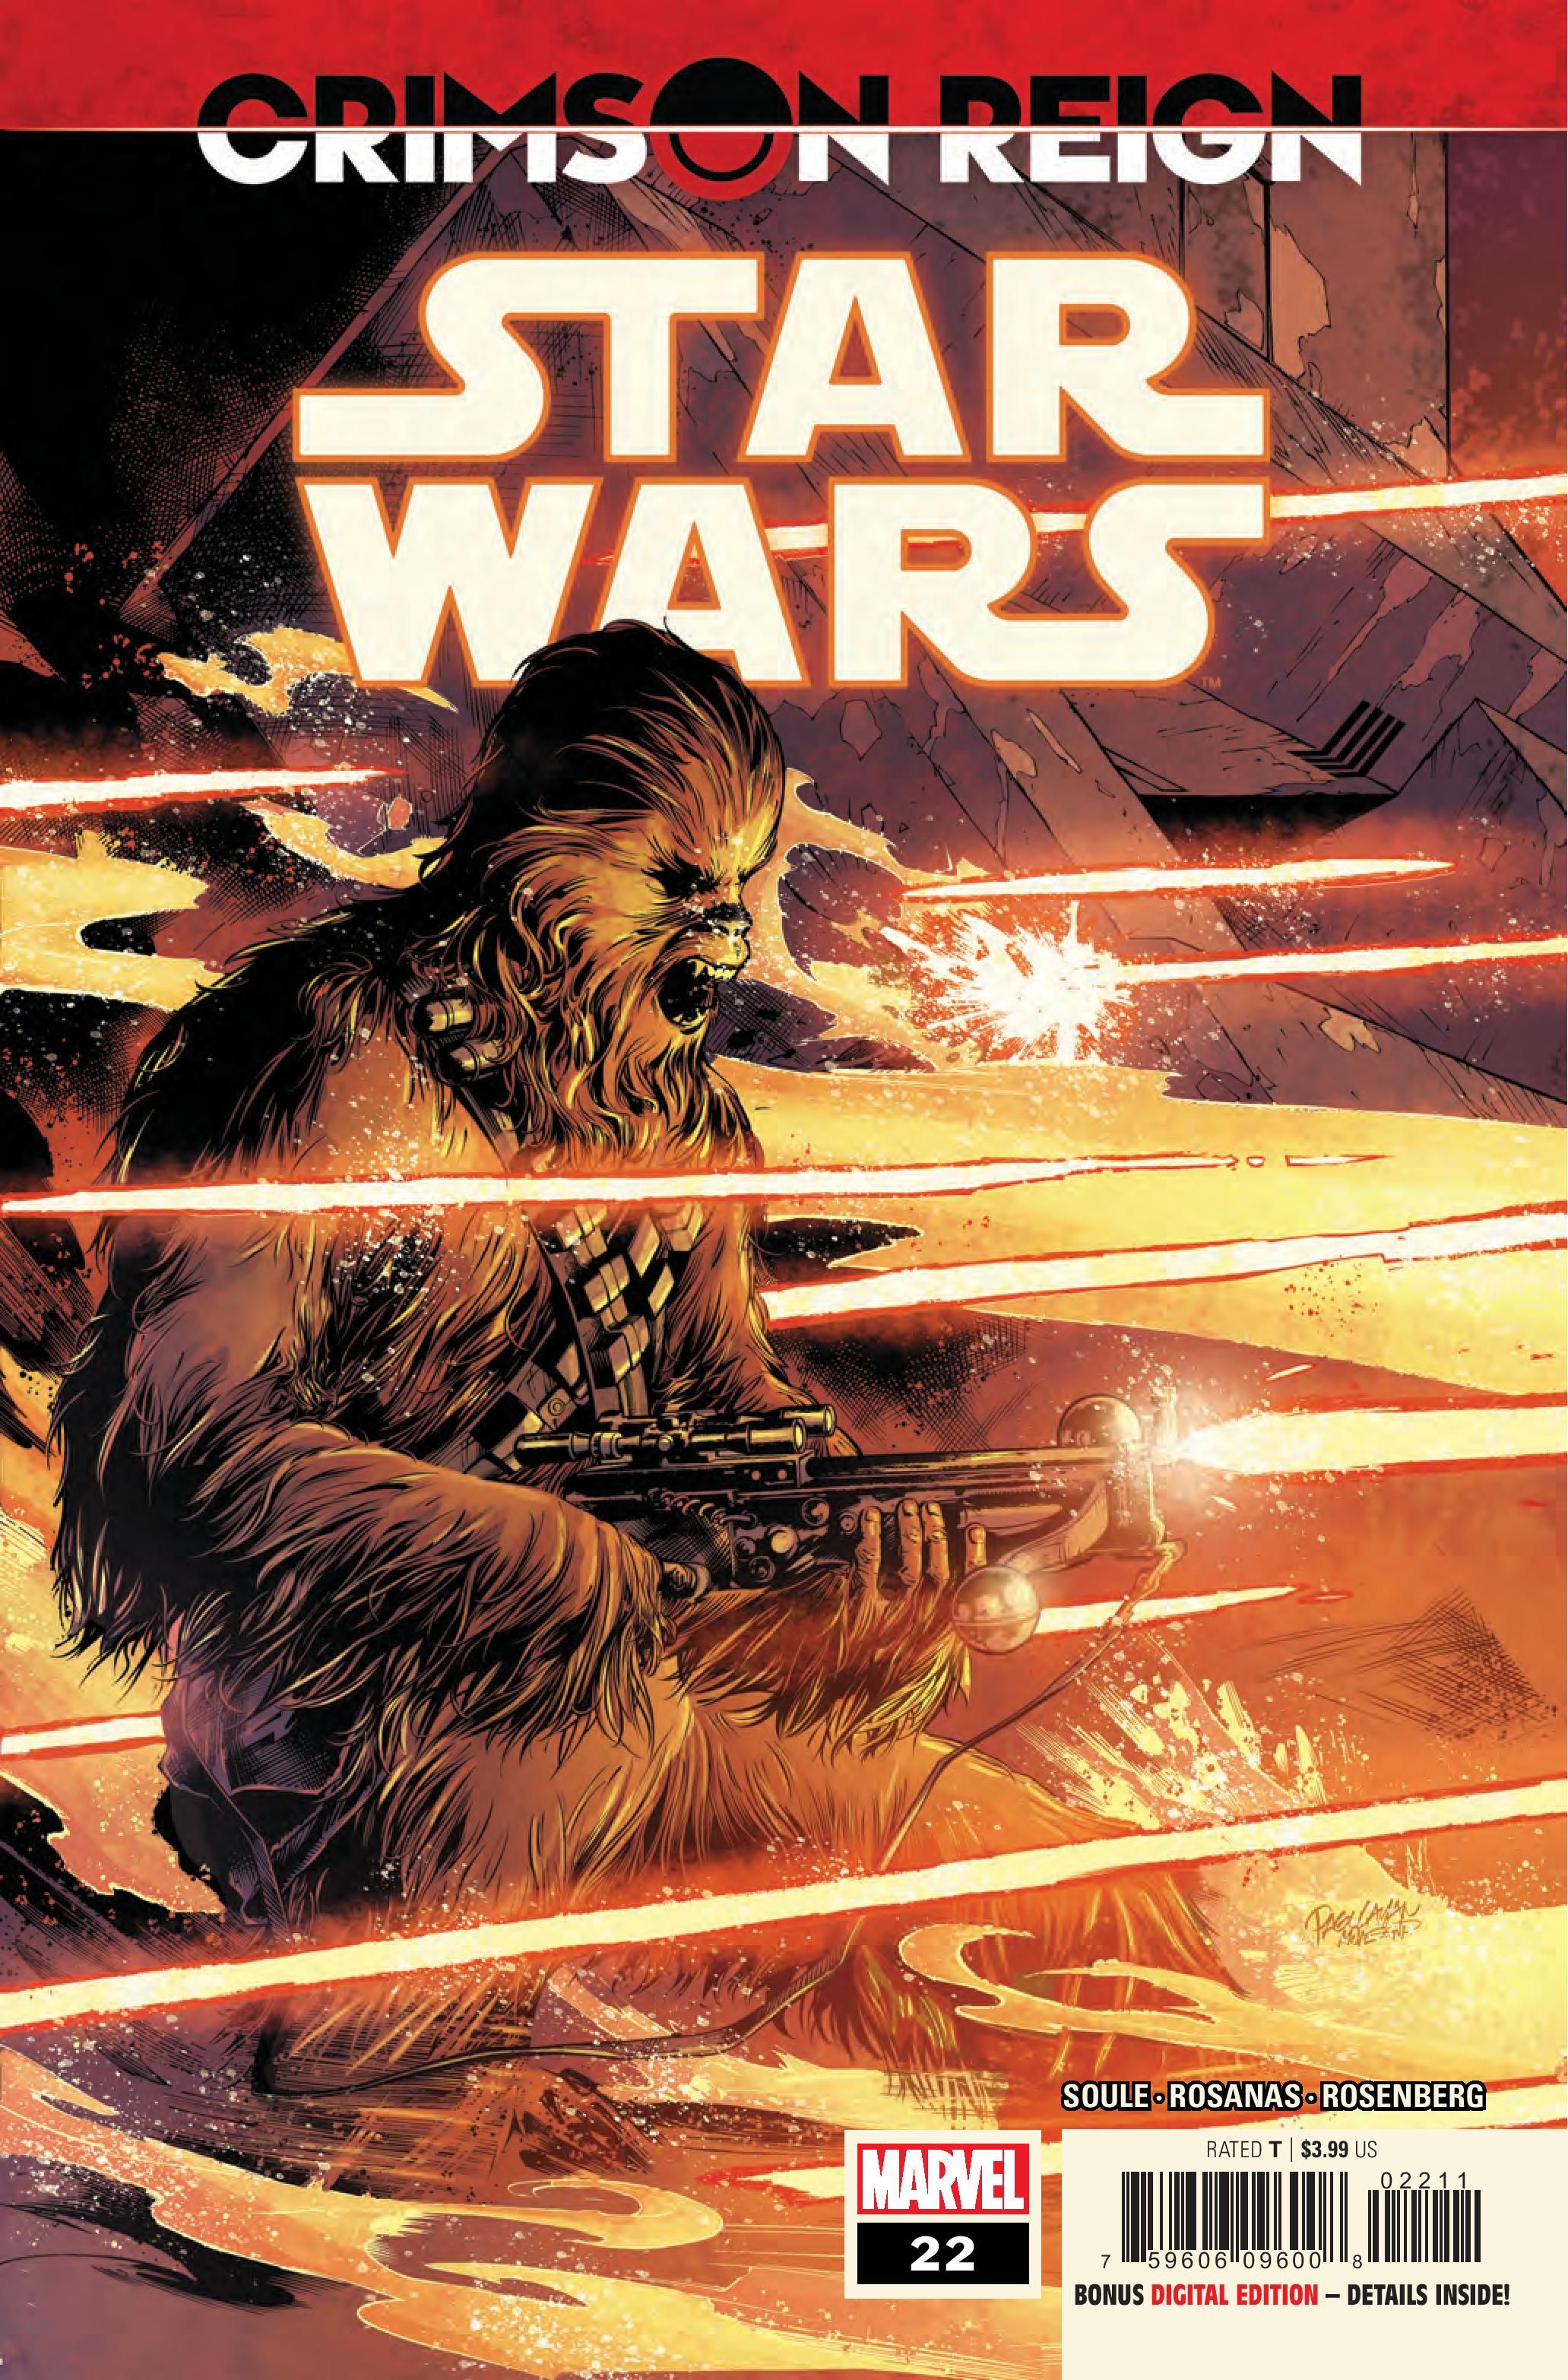 Chewbacca’s Plan to Rescue Han Solo From Jabba Was Much More Violent